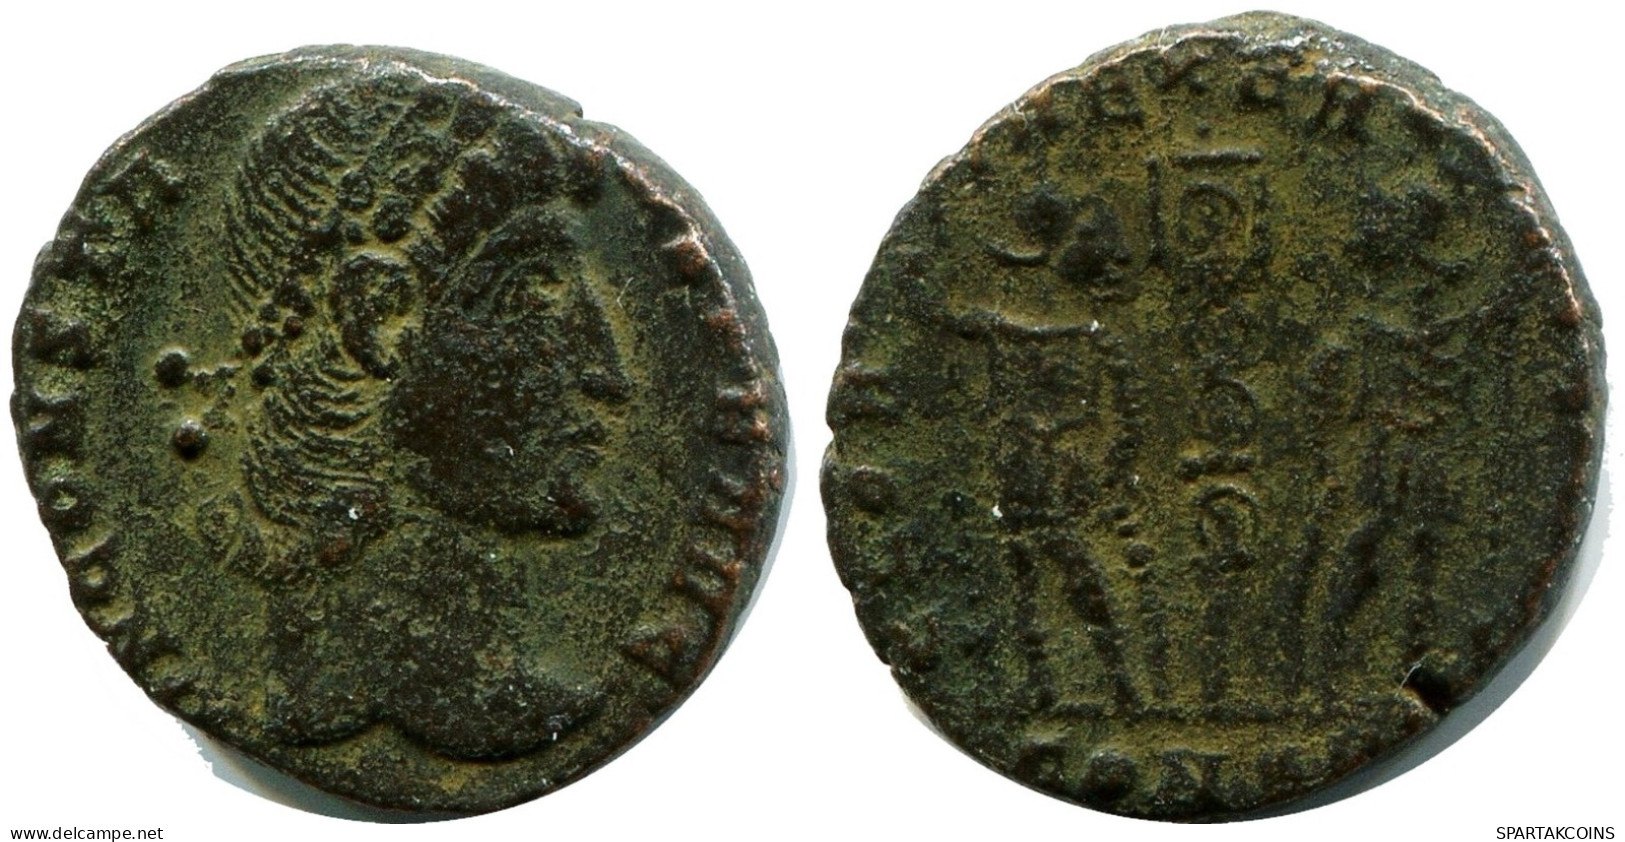 CONSTANS MINTED IN CONSTANTINOPLE FROM THE ROYAL ONTARIO MUSEUM #ANC11921.14.E.A - El Impero Christiano (307 / 363)